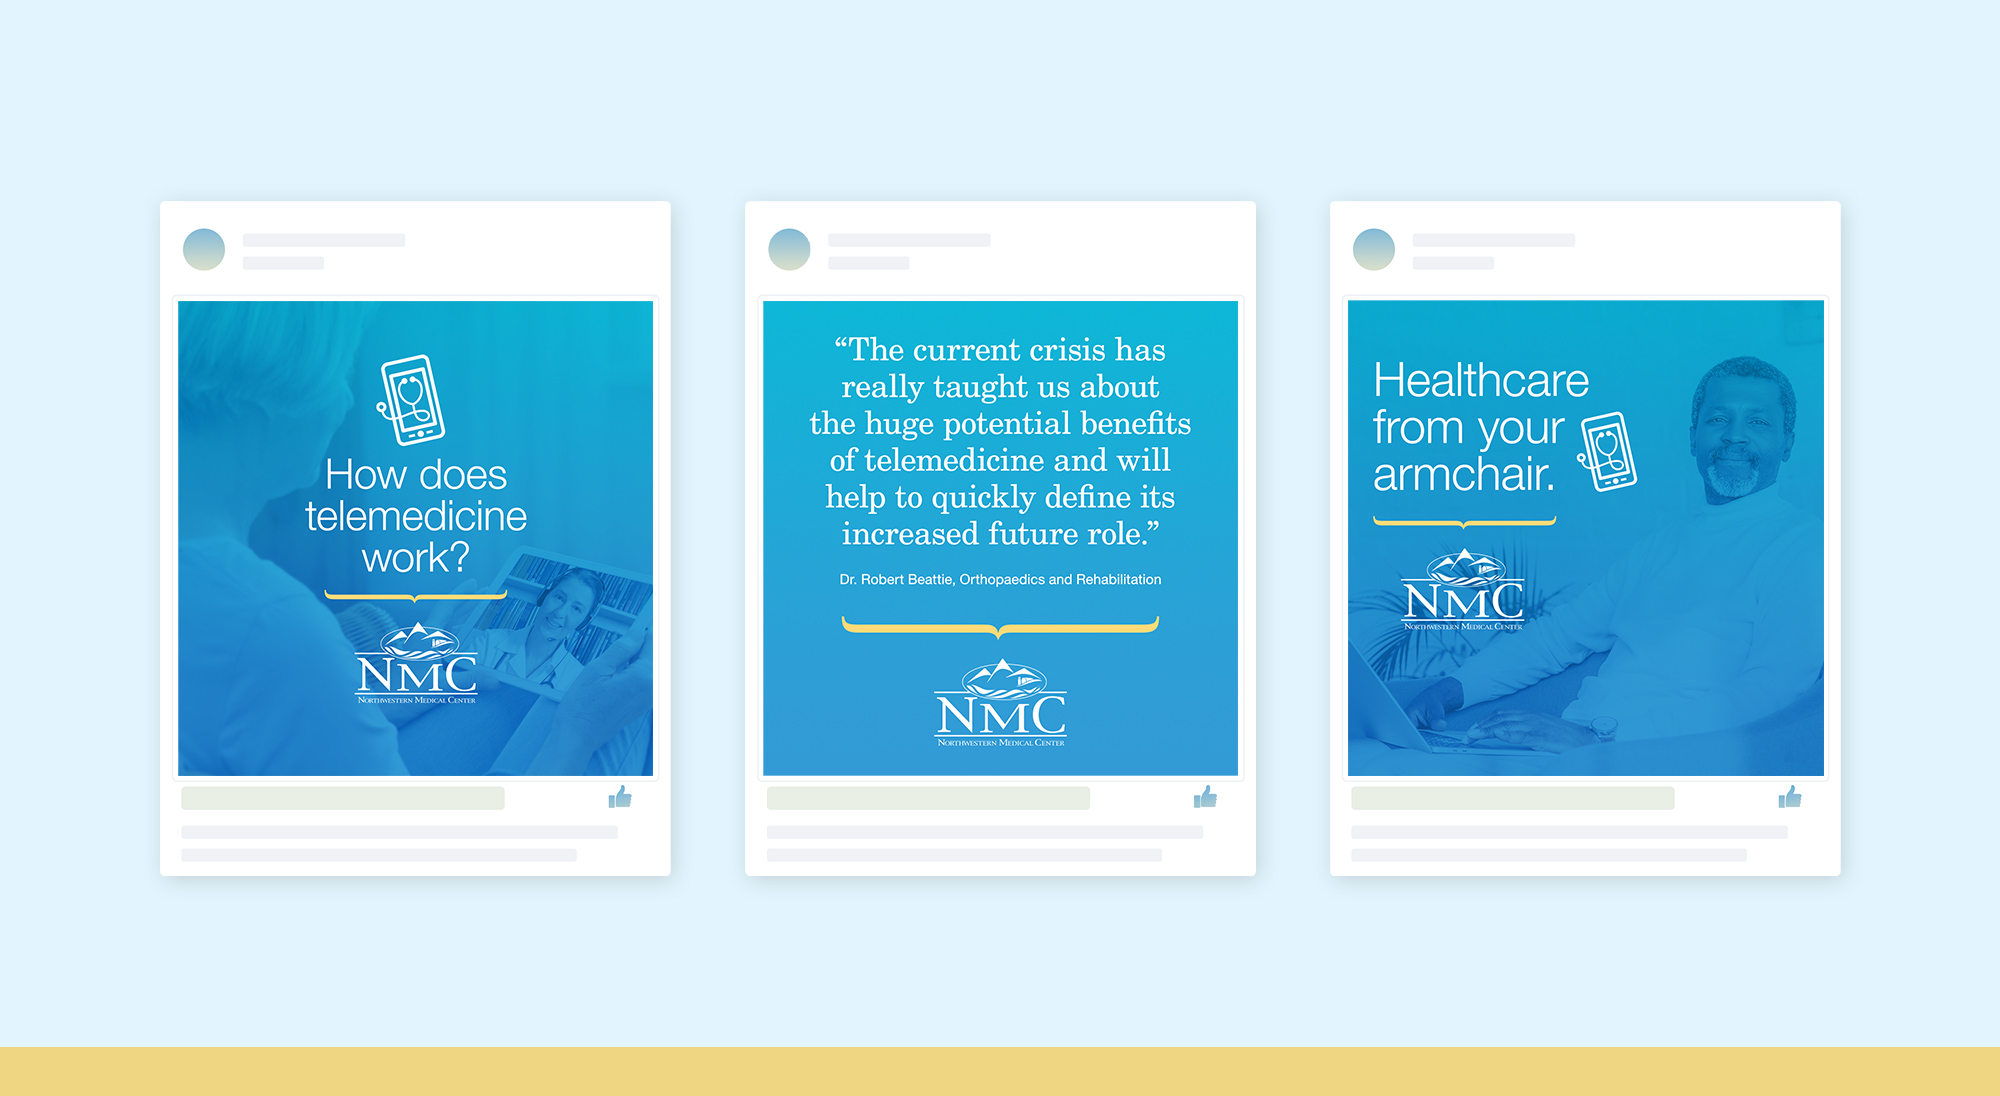 Social media marketing and design for North Western Medical Center, remote healthcare campaign.